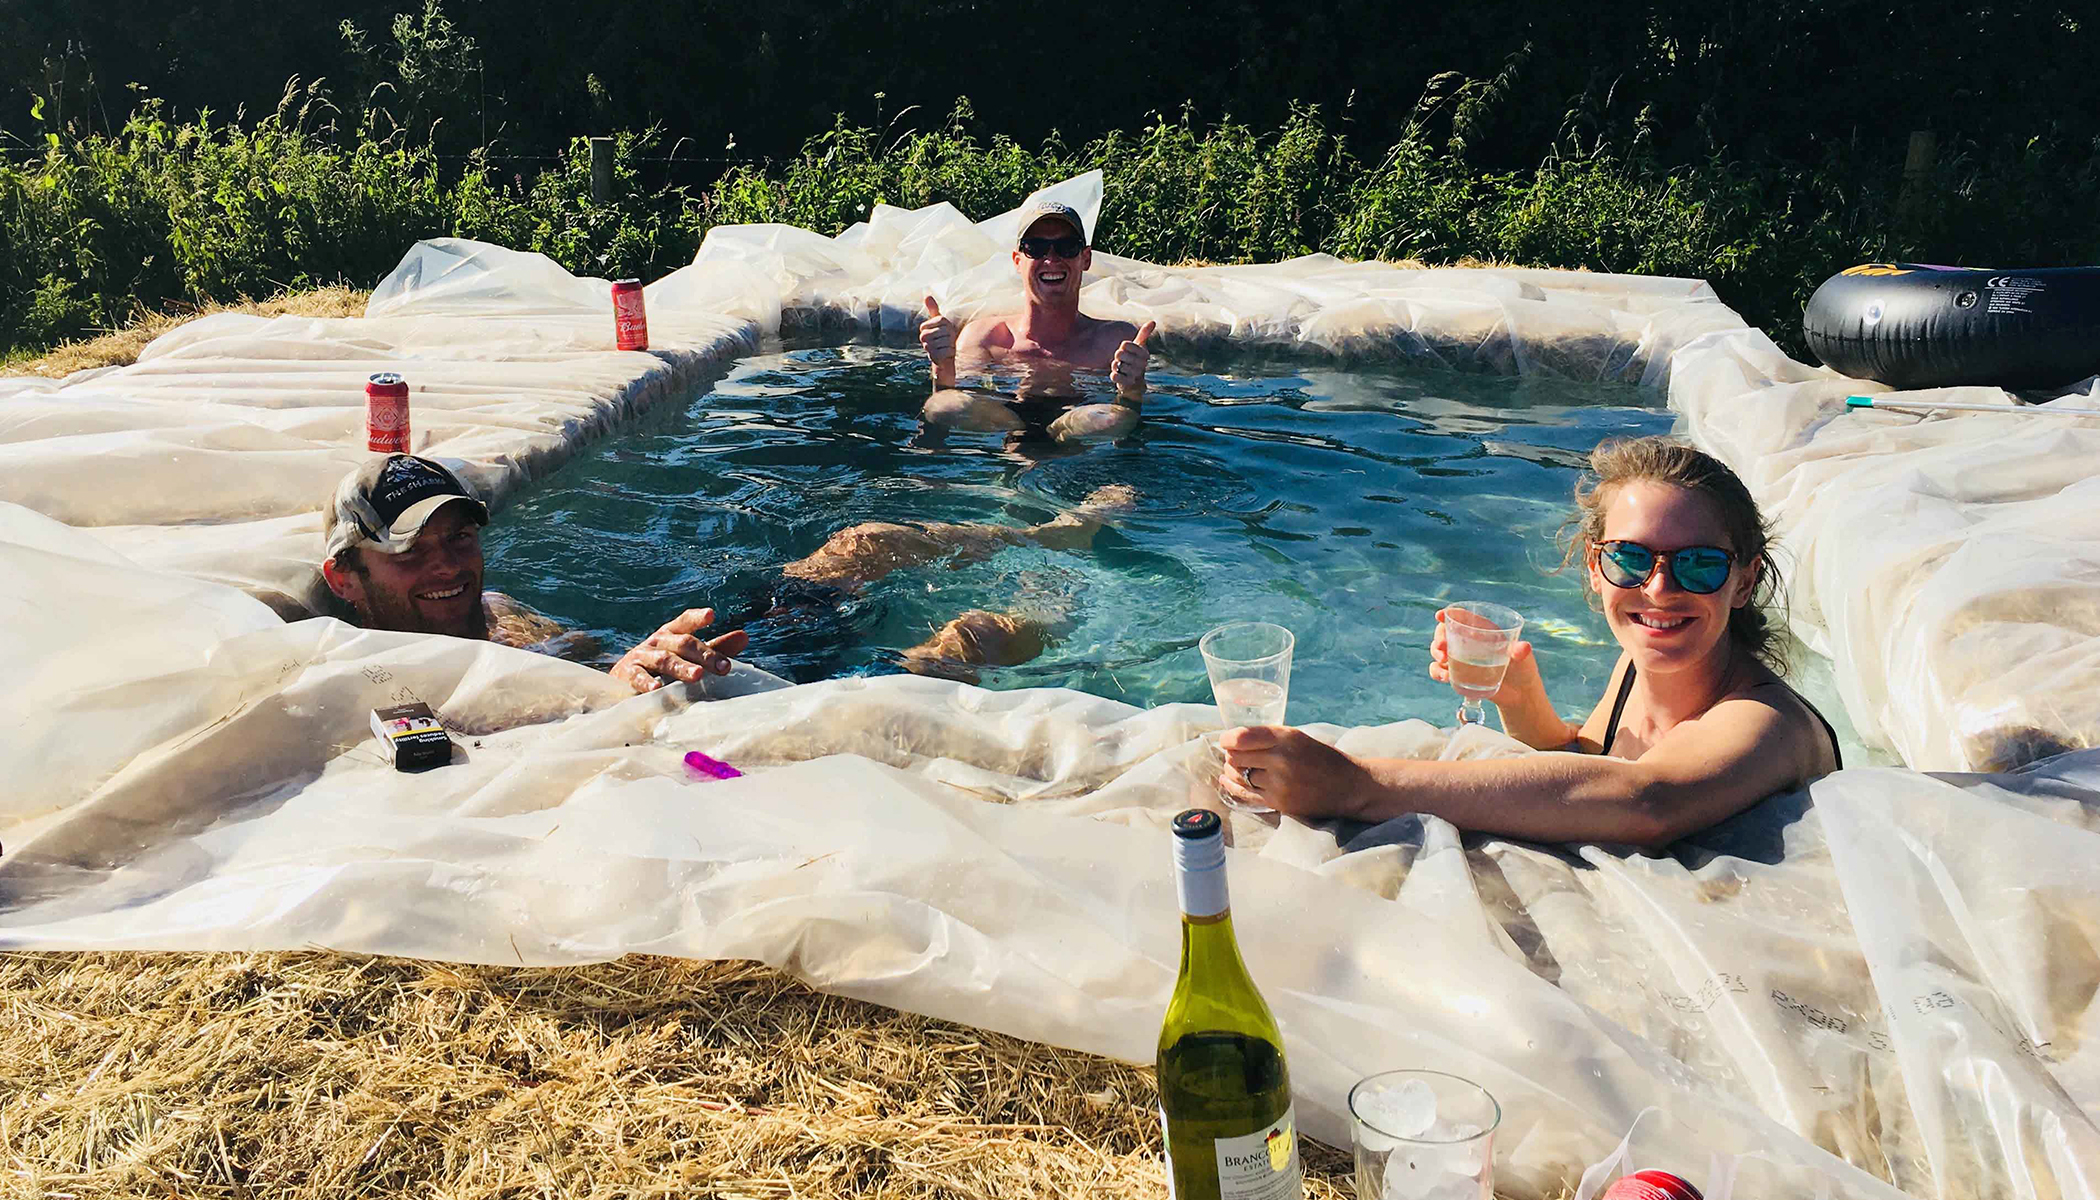 Family Build Makeshift Swimming Pool Out Of Hay Bales In Backyard During Heatwave